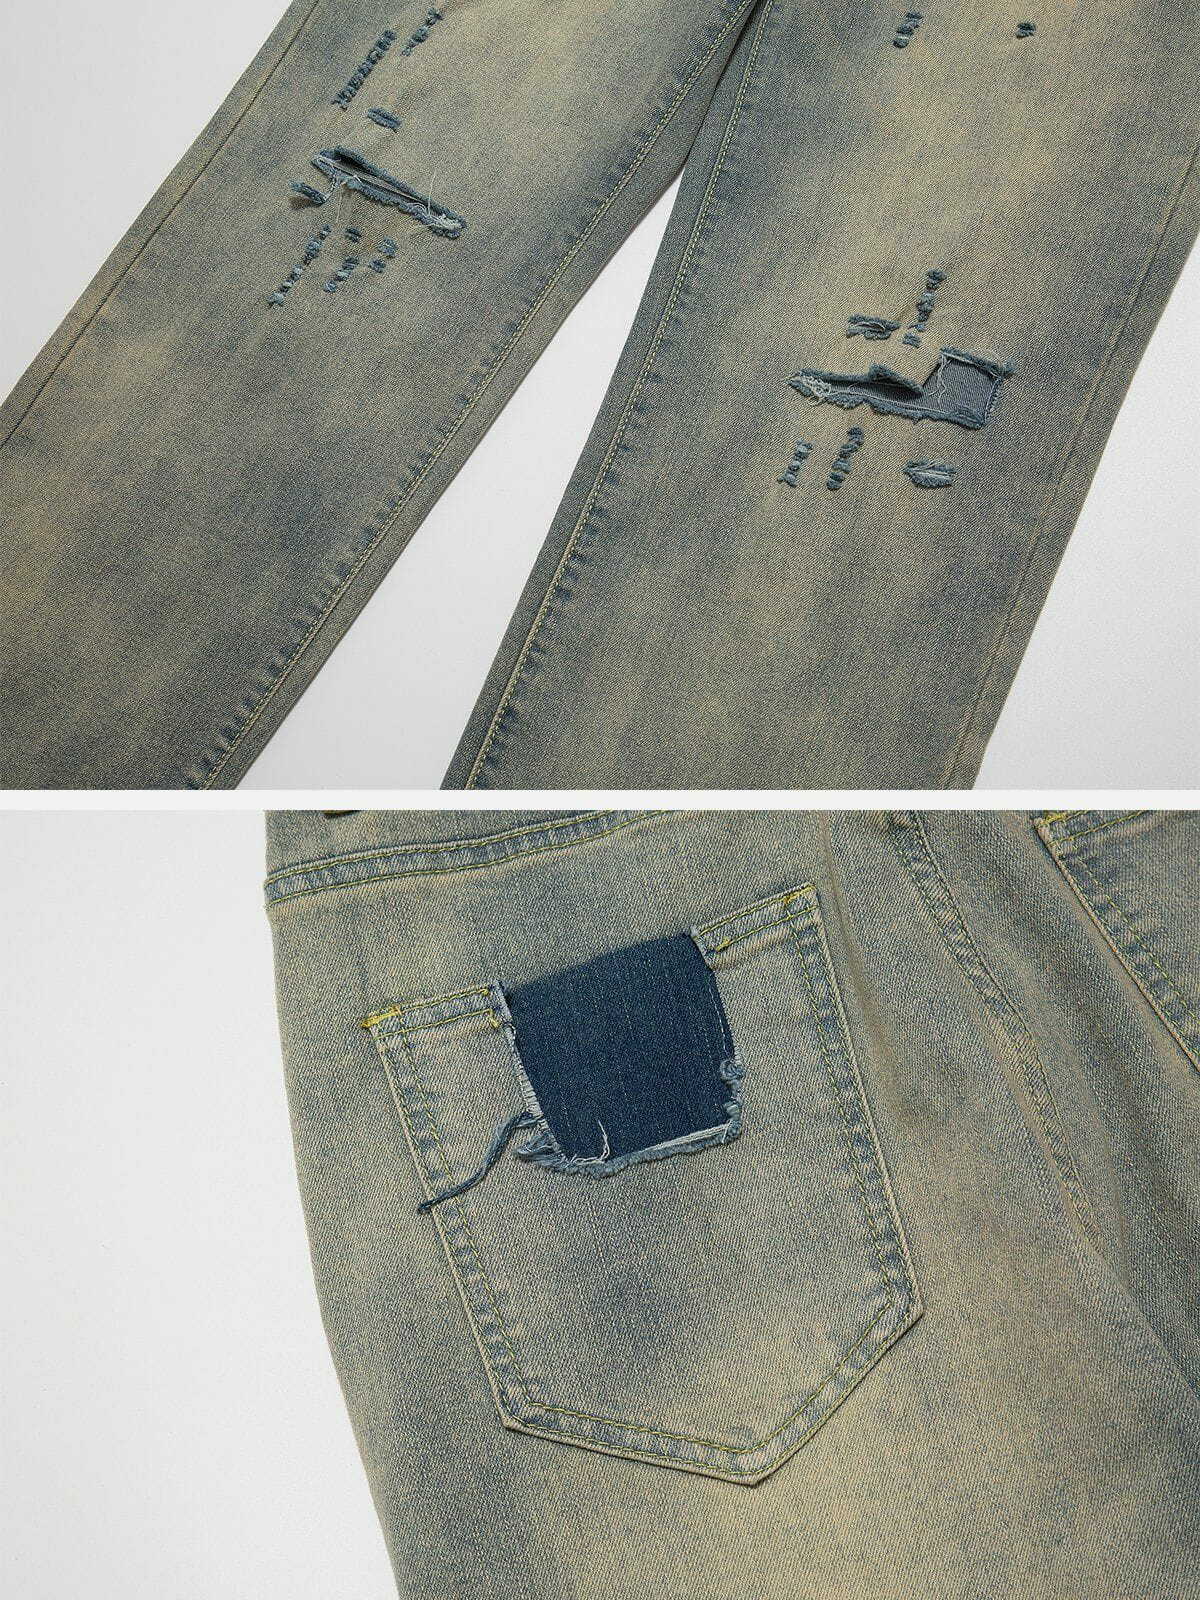 washed hole jeans edgy & retro streetwear 2446